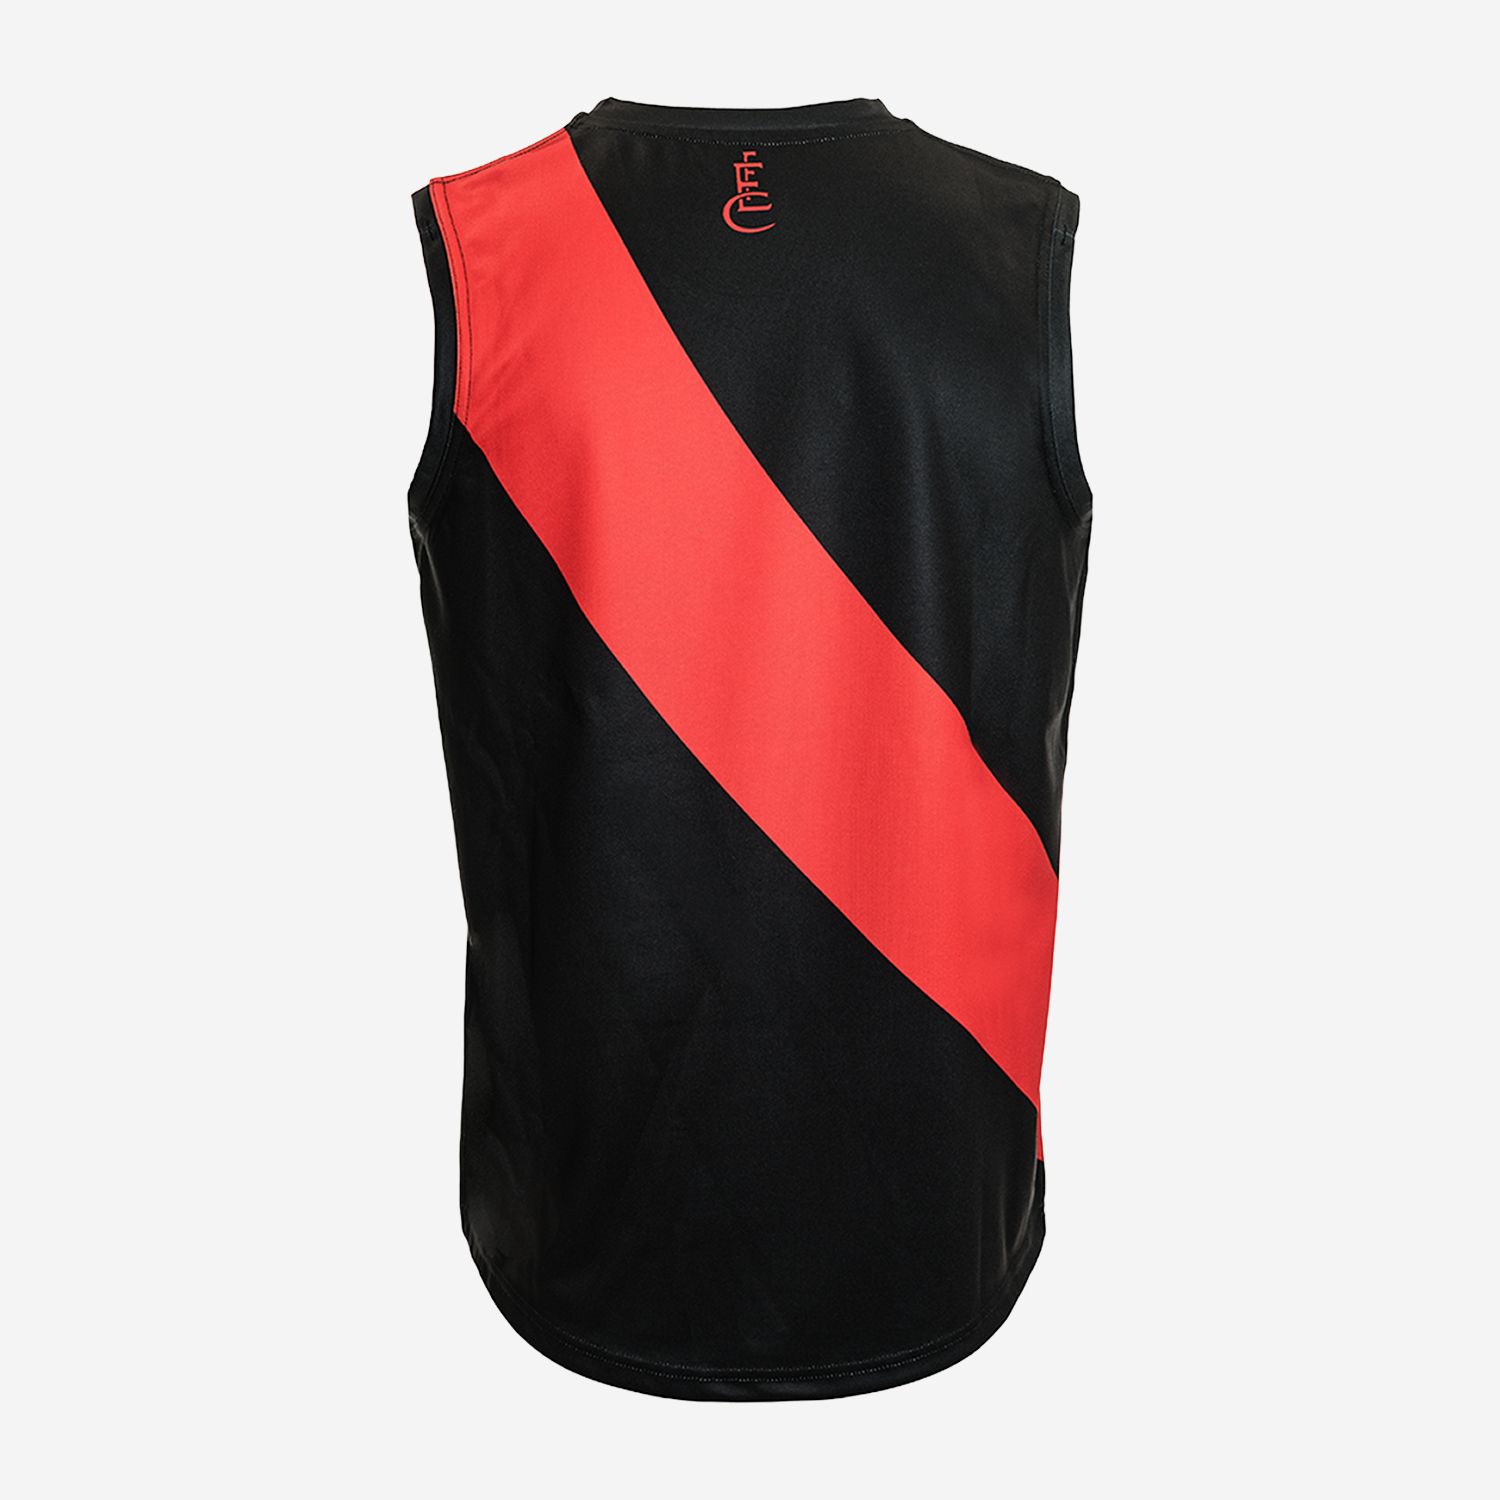 ESSENDON BOMBERS AFL REPLICA ADULT GUERNSEY